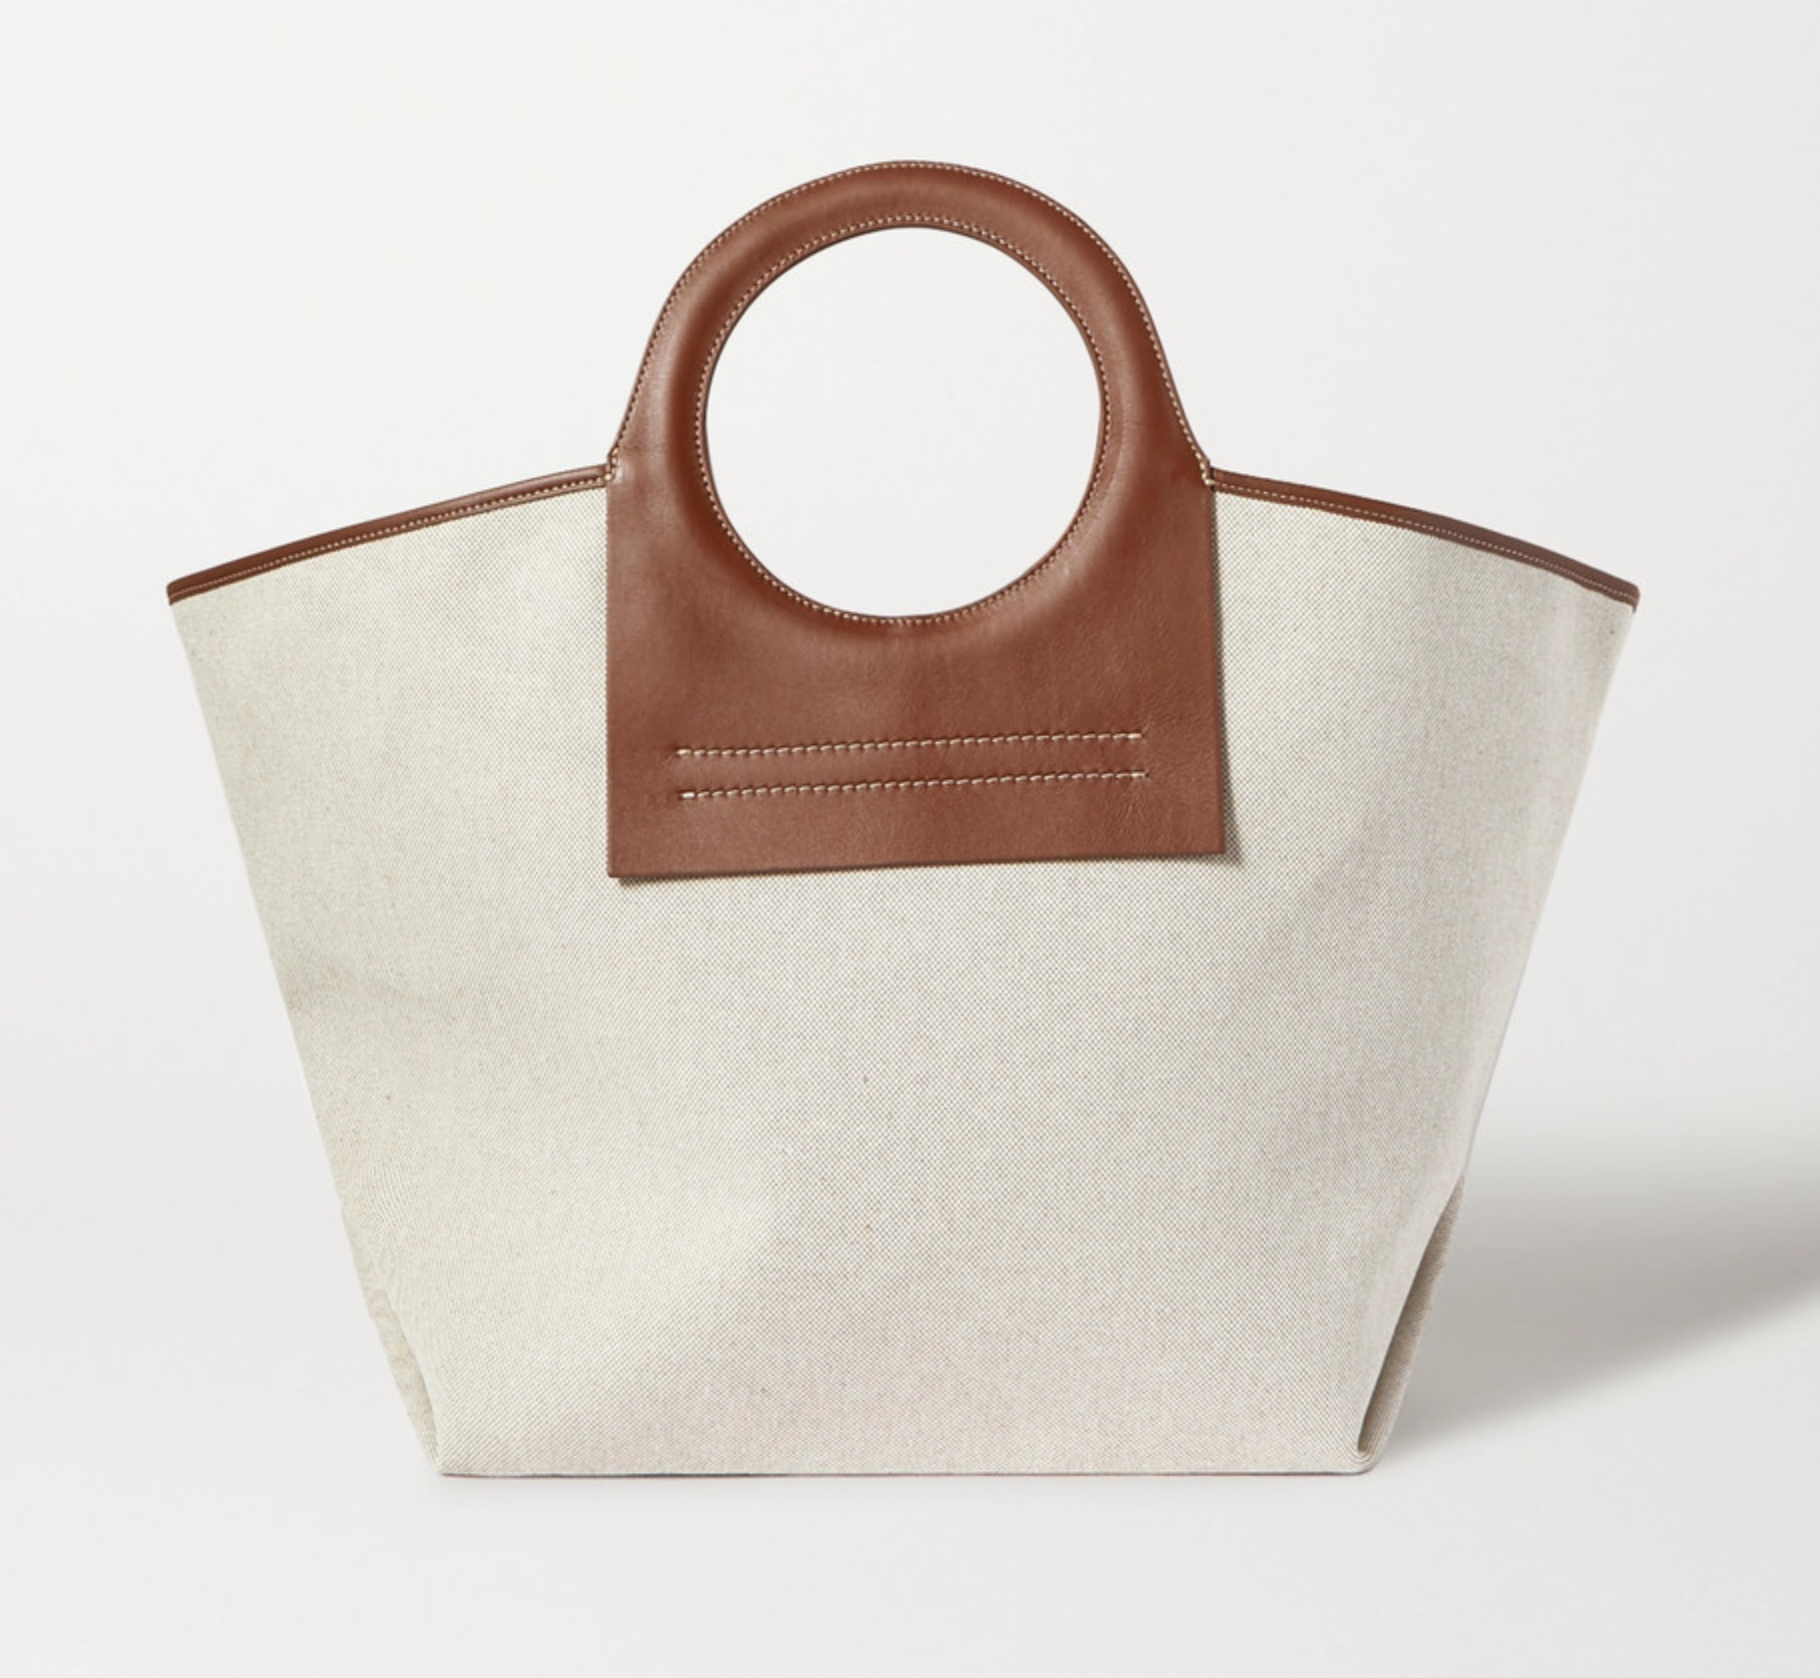 HEREU+ NET SUSTAIN Cala large leather-trimmed canvas tote